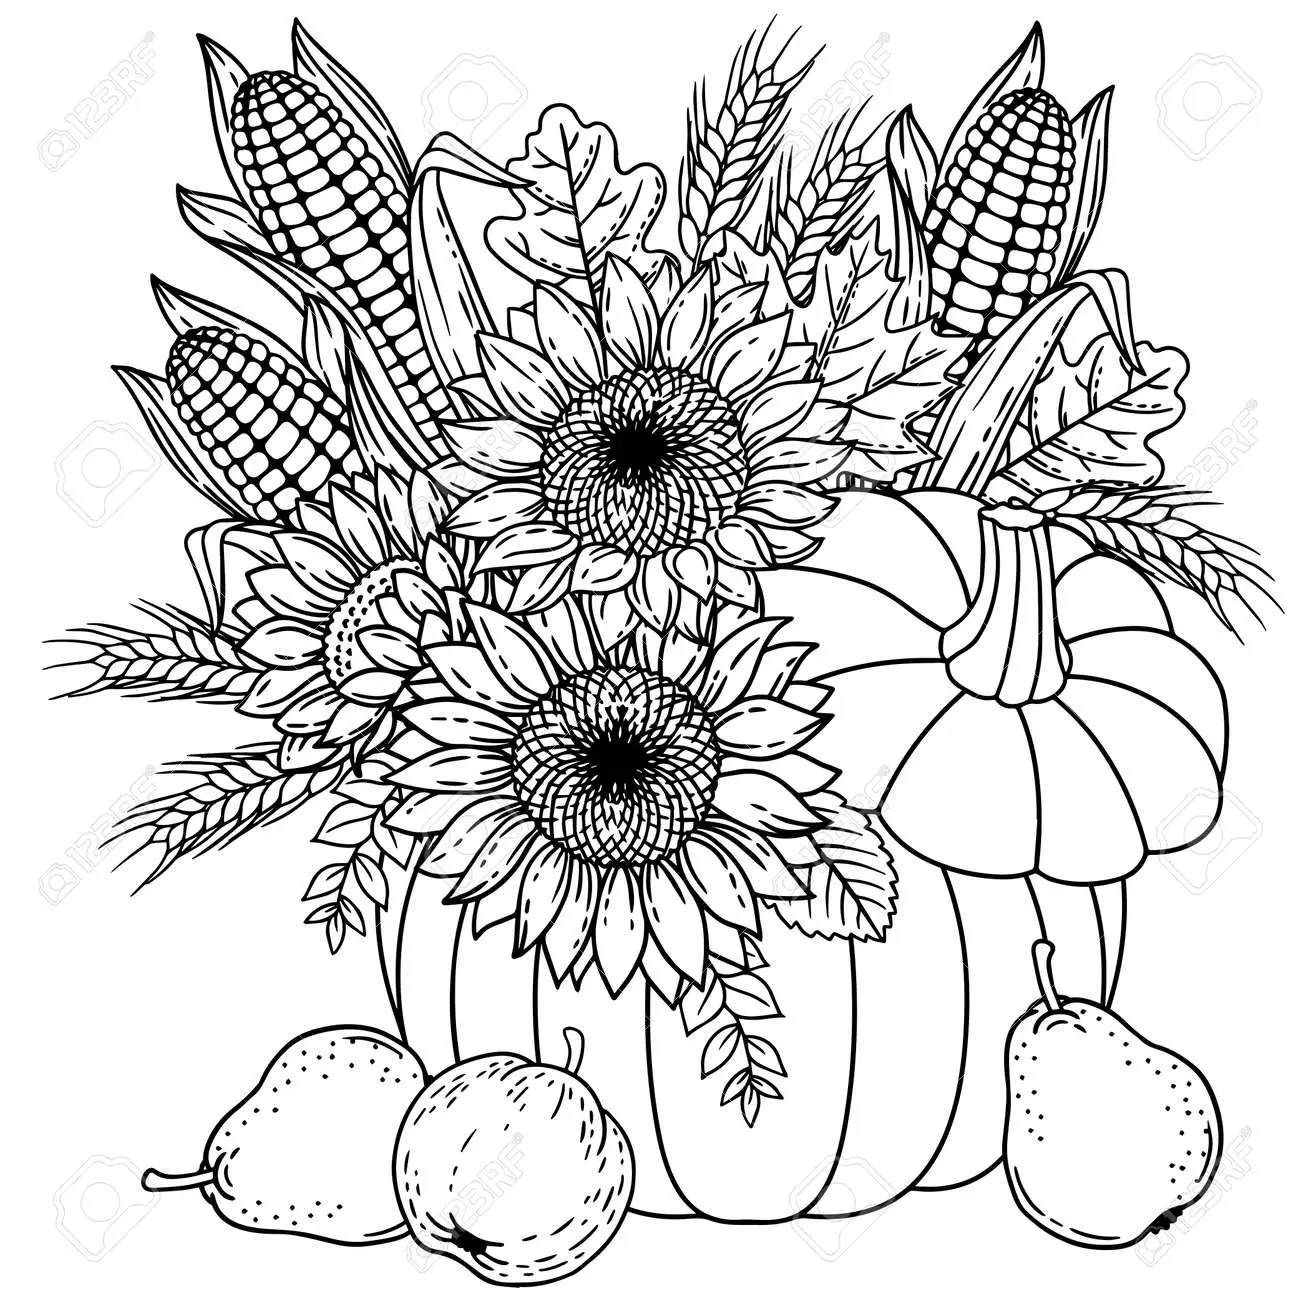 Harvest Coloring Pages 1